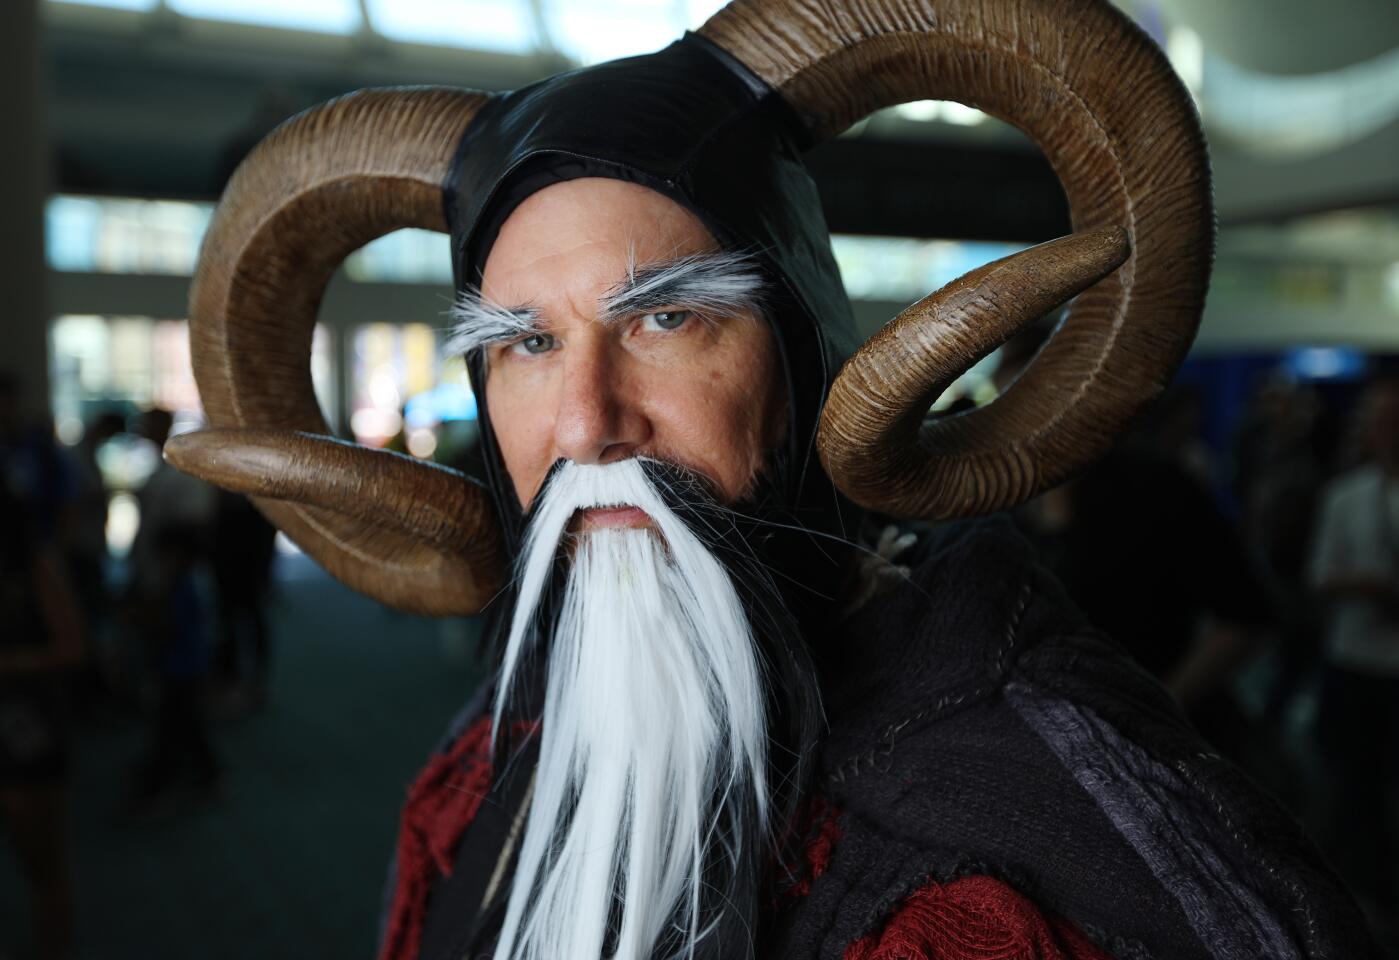 Joe Horger of San Diego dressed as Tim the Enchanter at Comic-Con International.